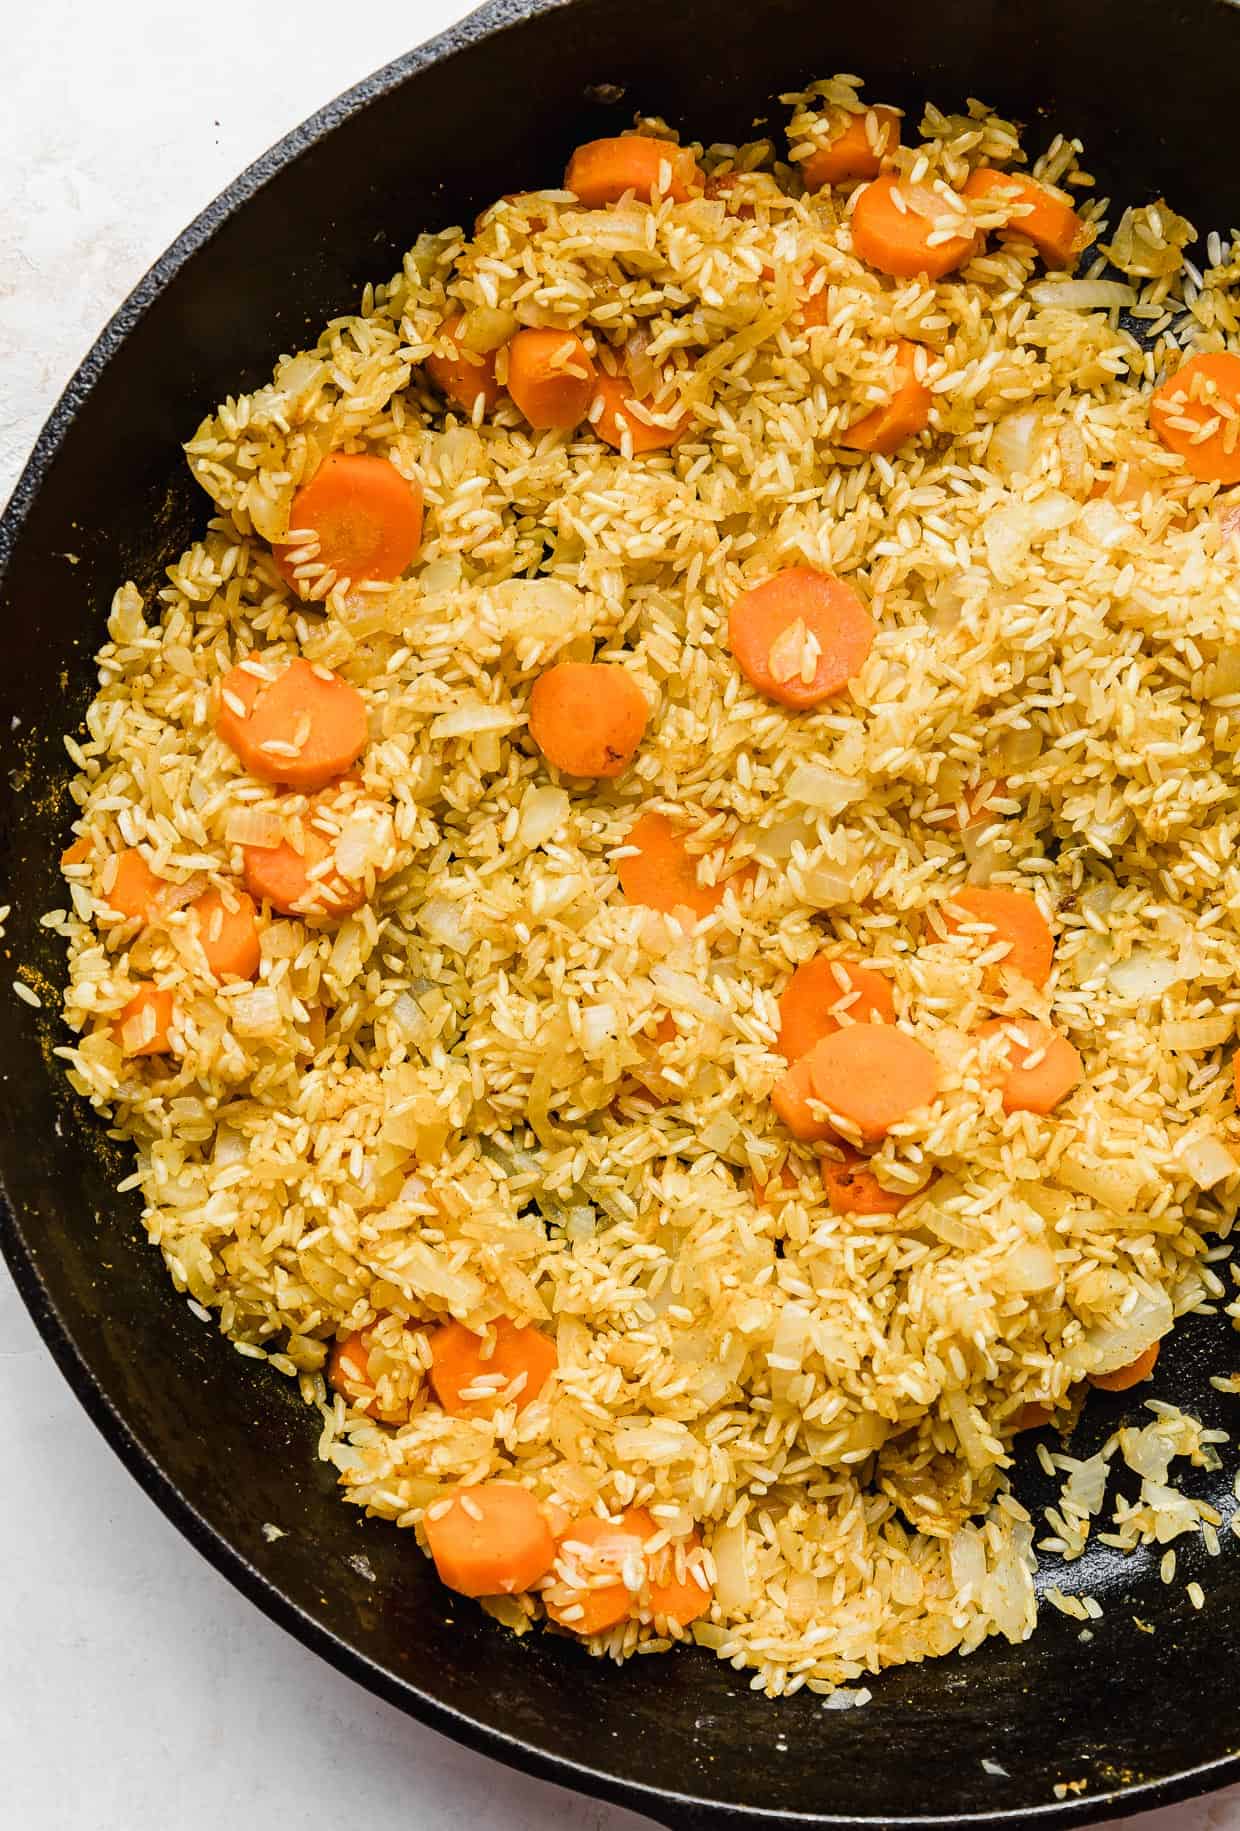 Carrots and rice in a black skillet.